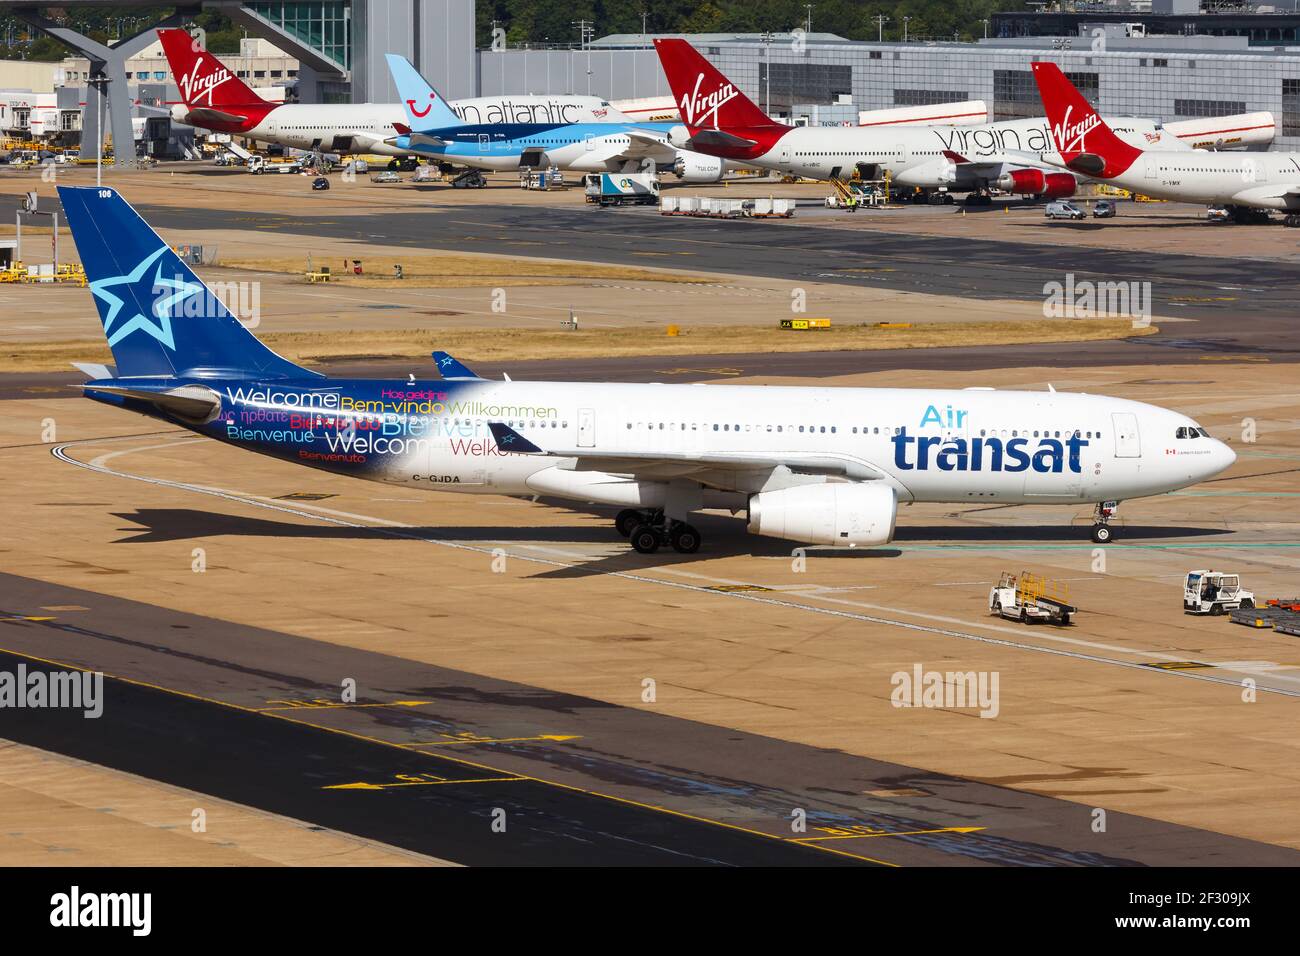 London, United Kingdom - July 31, 2018: Air Transat Airbus A330 airplane at London Gatwick airport (LGW) in the United Kingdom. Airbus is a European a Stock Photo